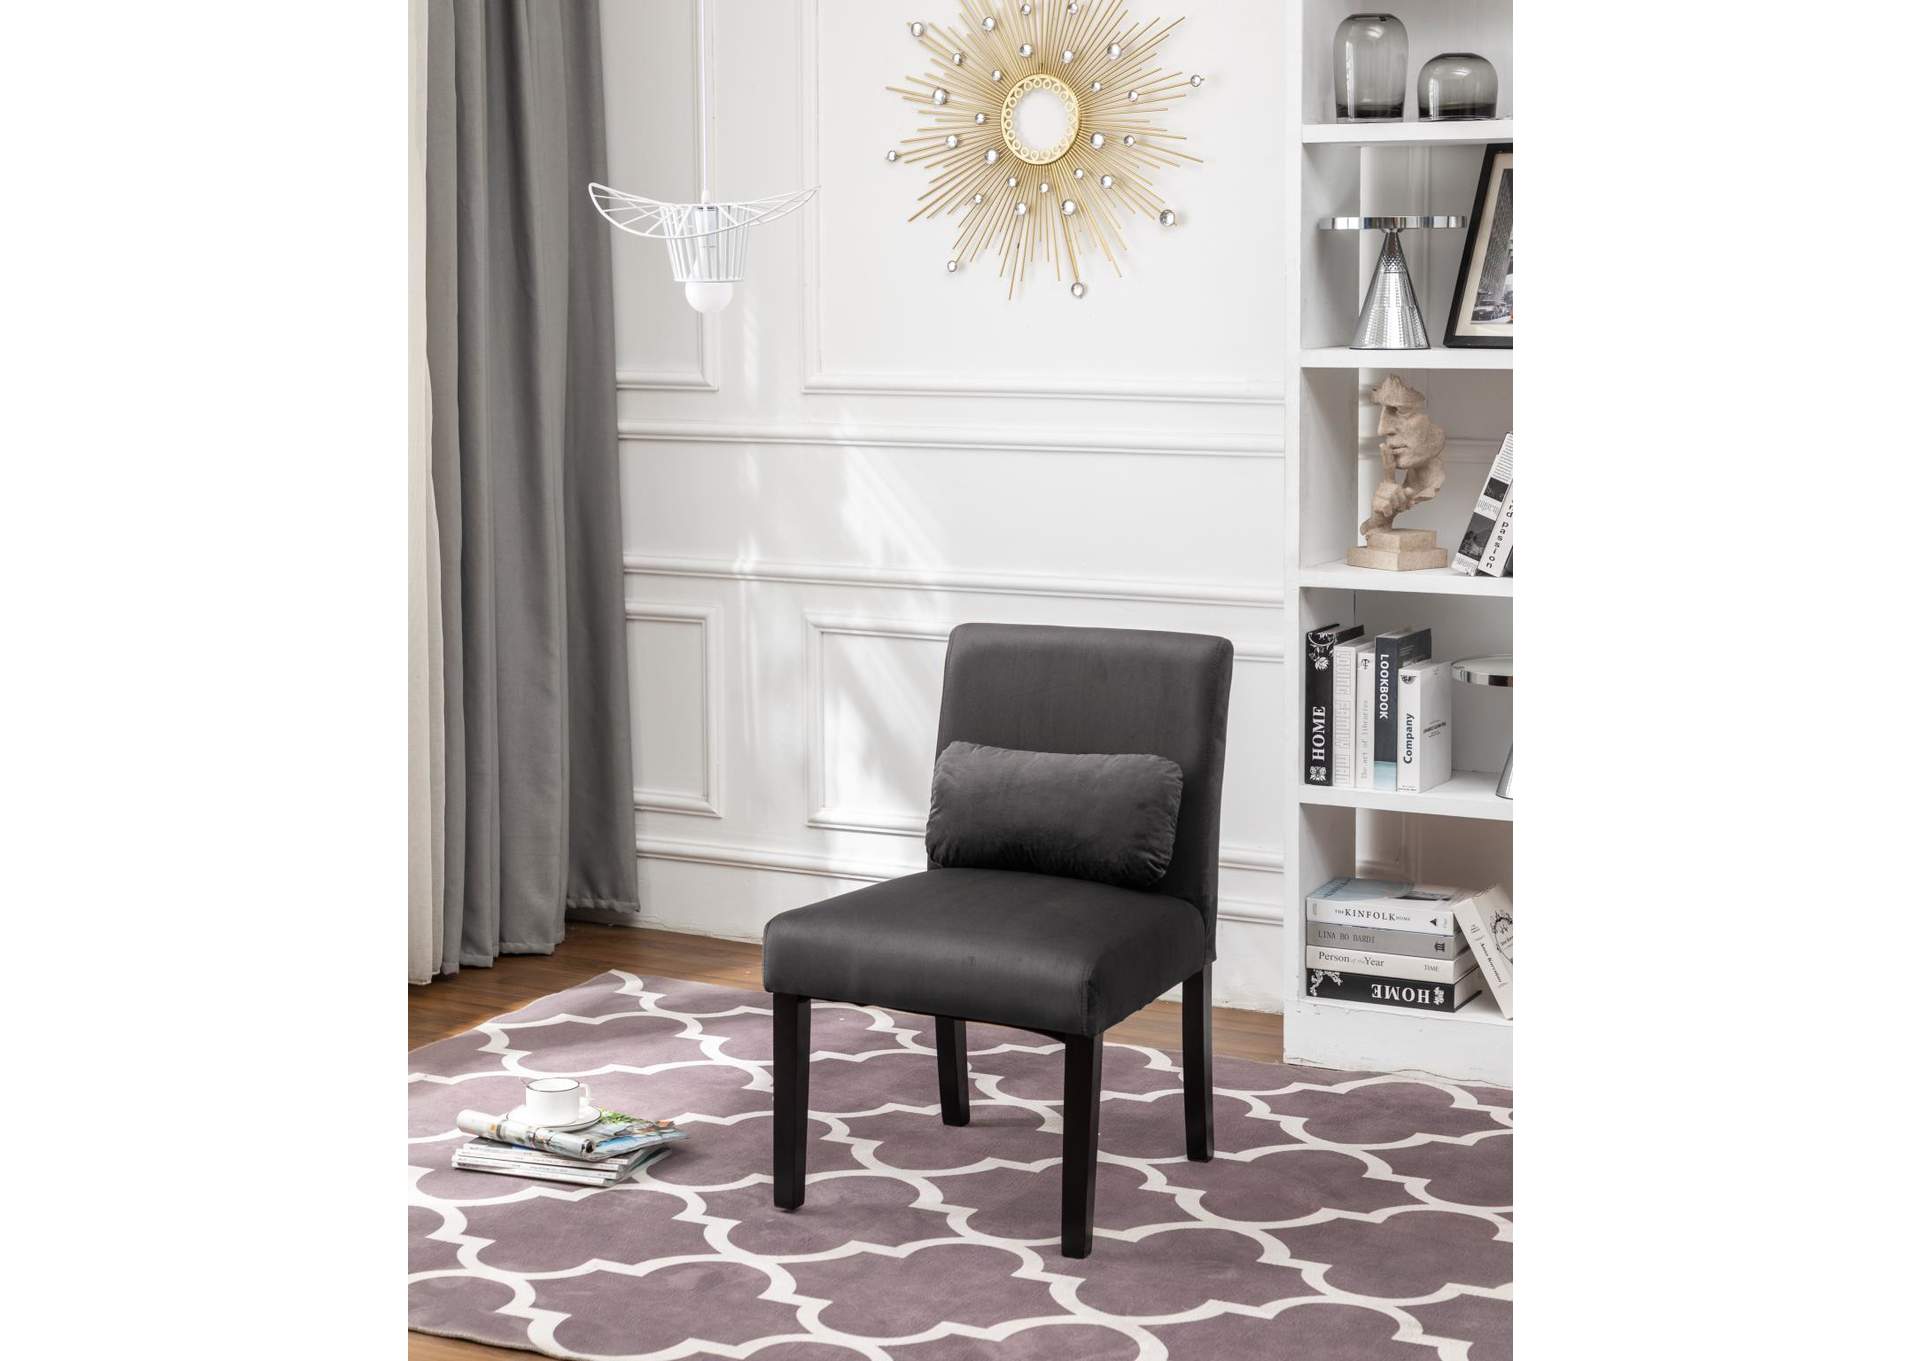 C003G Grey Chair 2-In-1Box,Global Trading